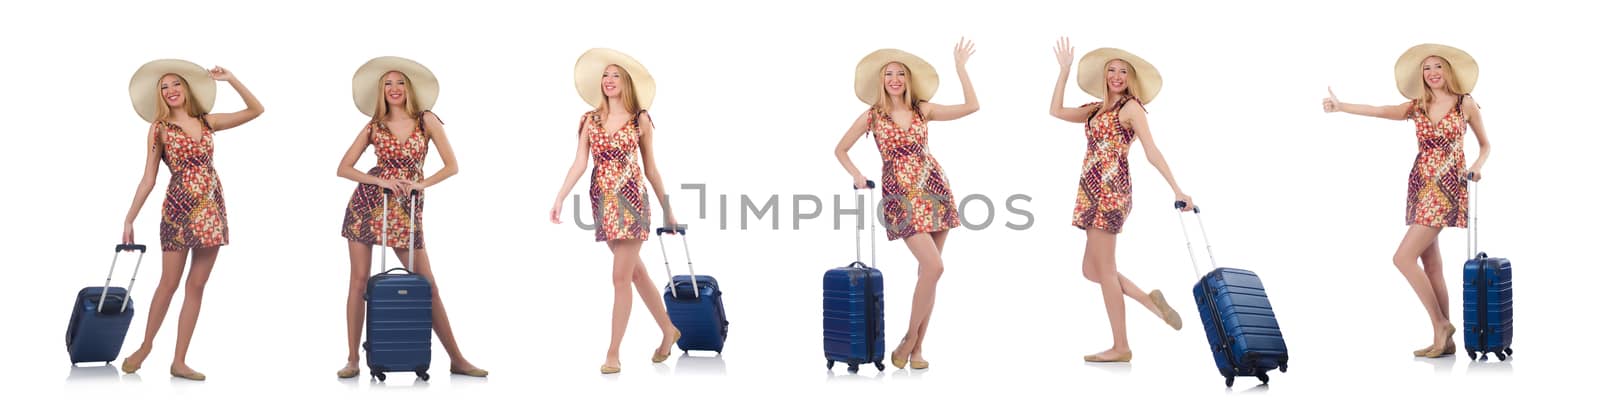 Woman going to summer vacation isolated on white by Elnur